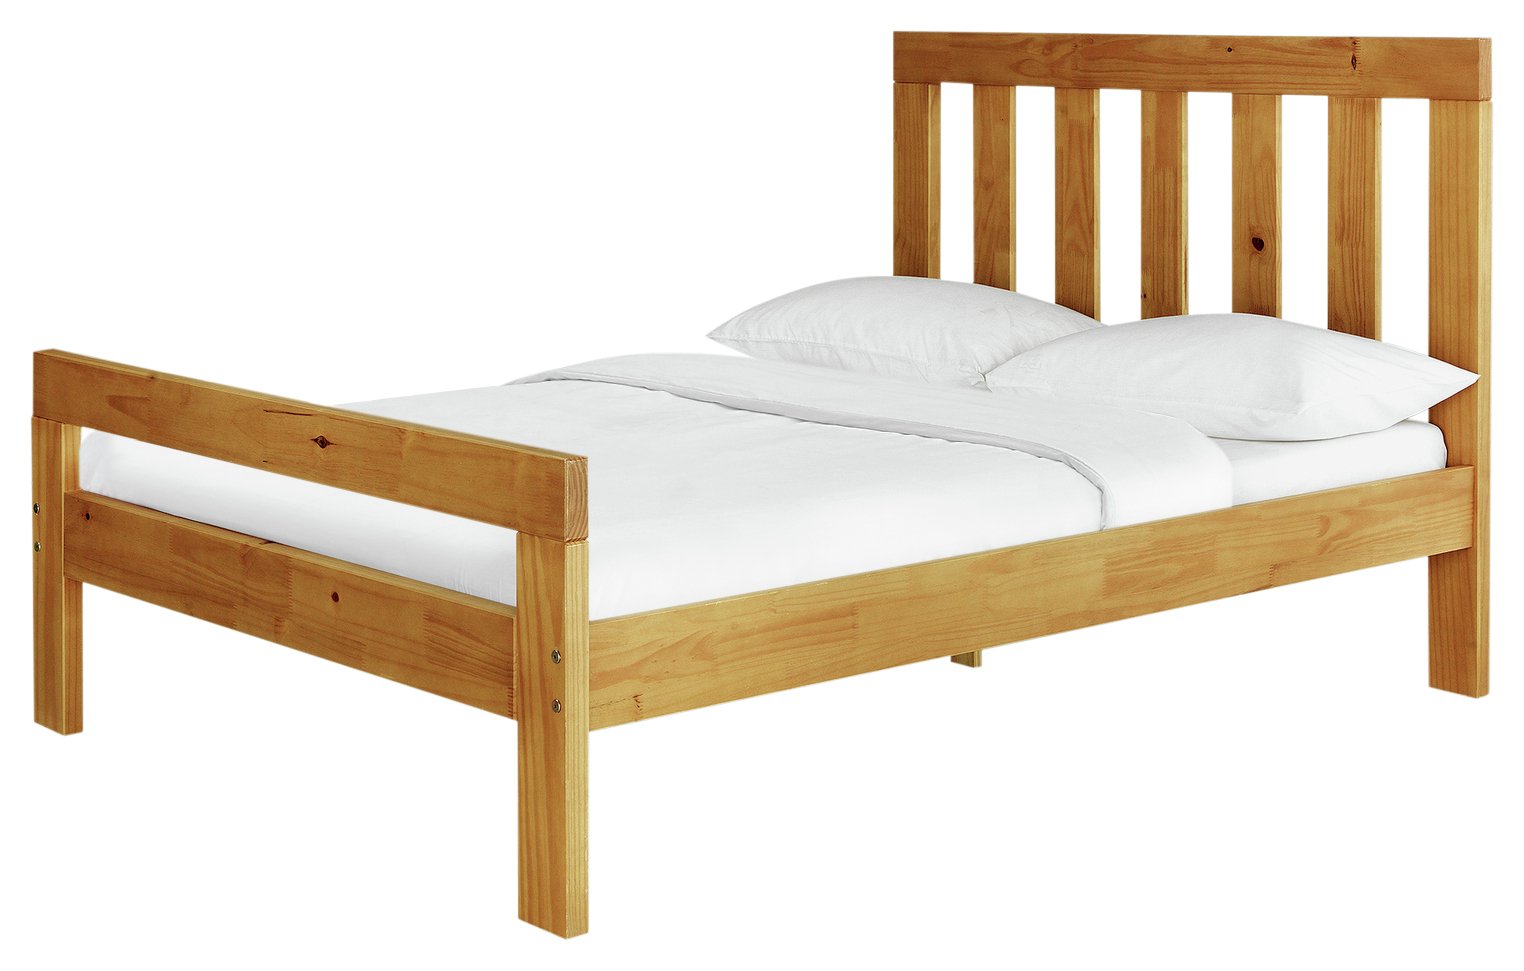 Argos Home Chile Double Bed Frame review